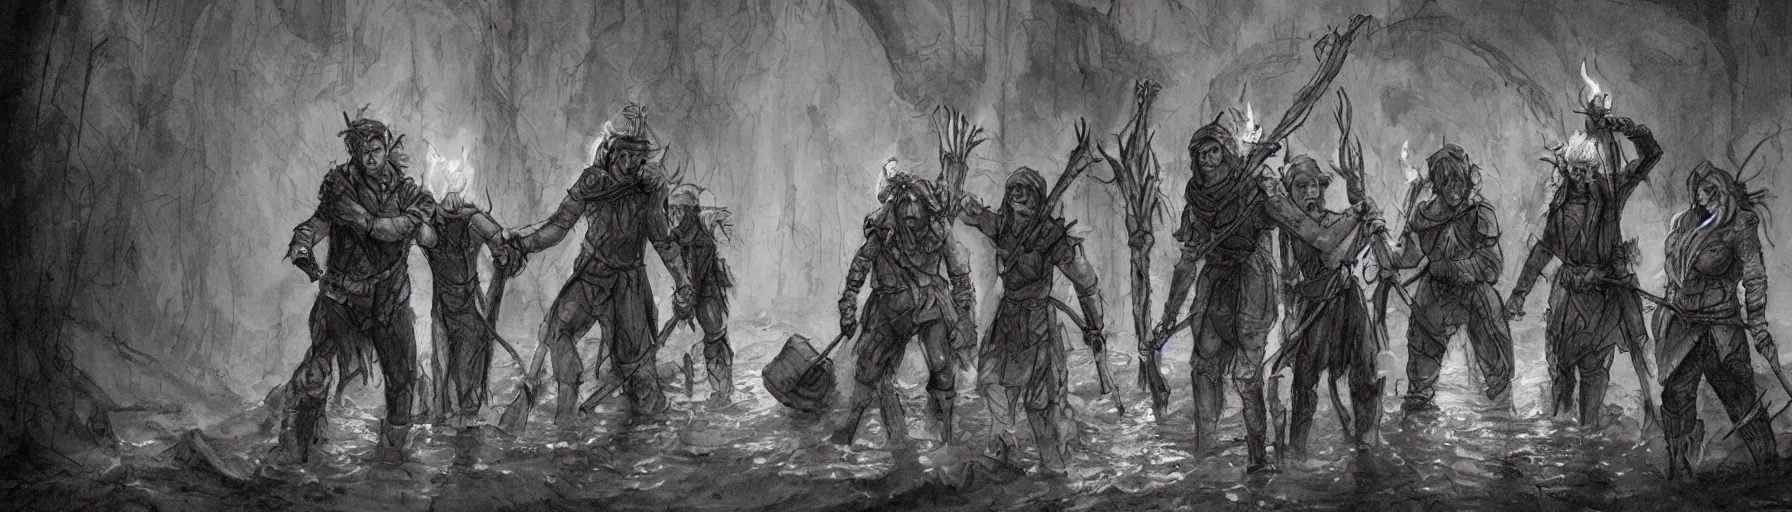 Prompt: adventurers carrying torches wade through waist - deep flooded sewer tunnels. fantasy art, underground, stream, crumbling masonry, darkness, sewage falling from grates, abandoned spaces, torchlight. sketch art. roots, mud, mushrooms, d & d.